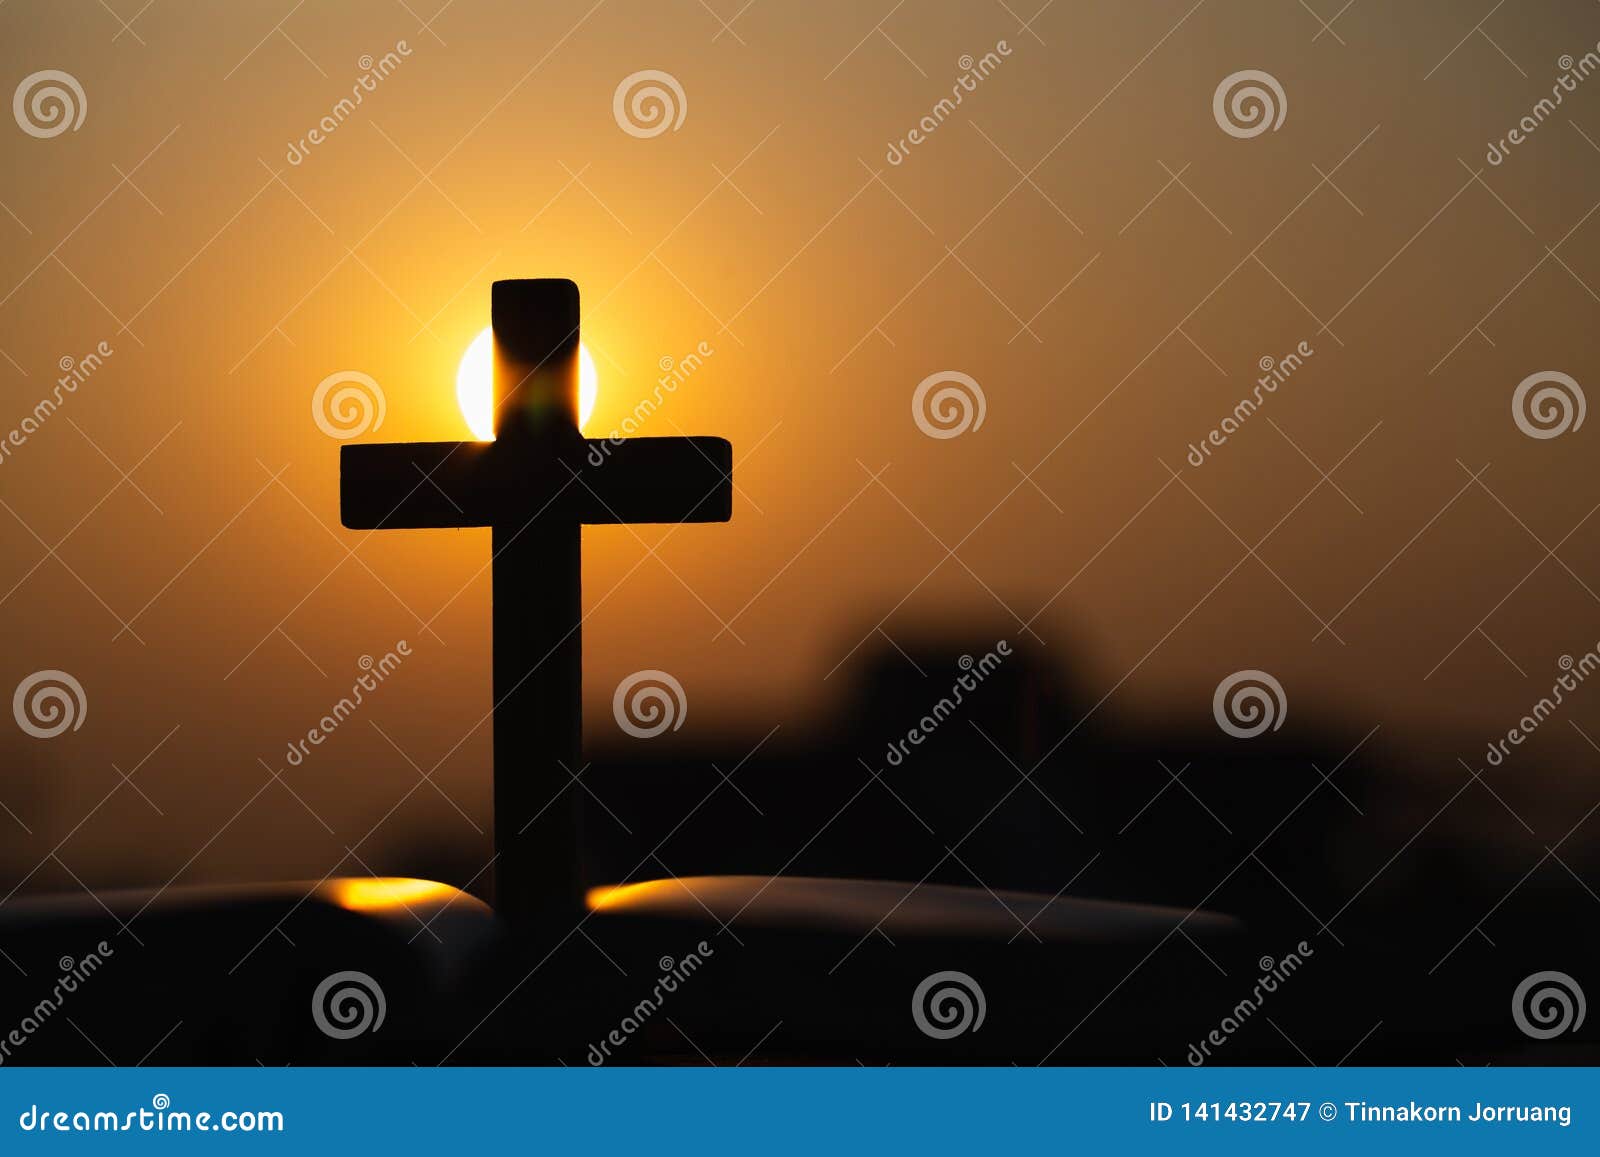 Silhouette of the Wooden Cross Over Opened Bible with a Bright ...